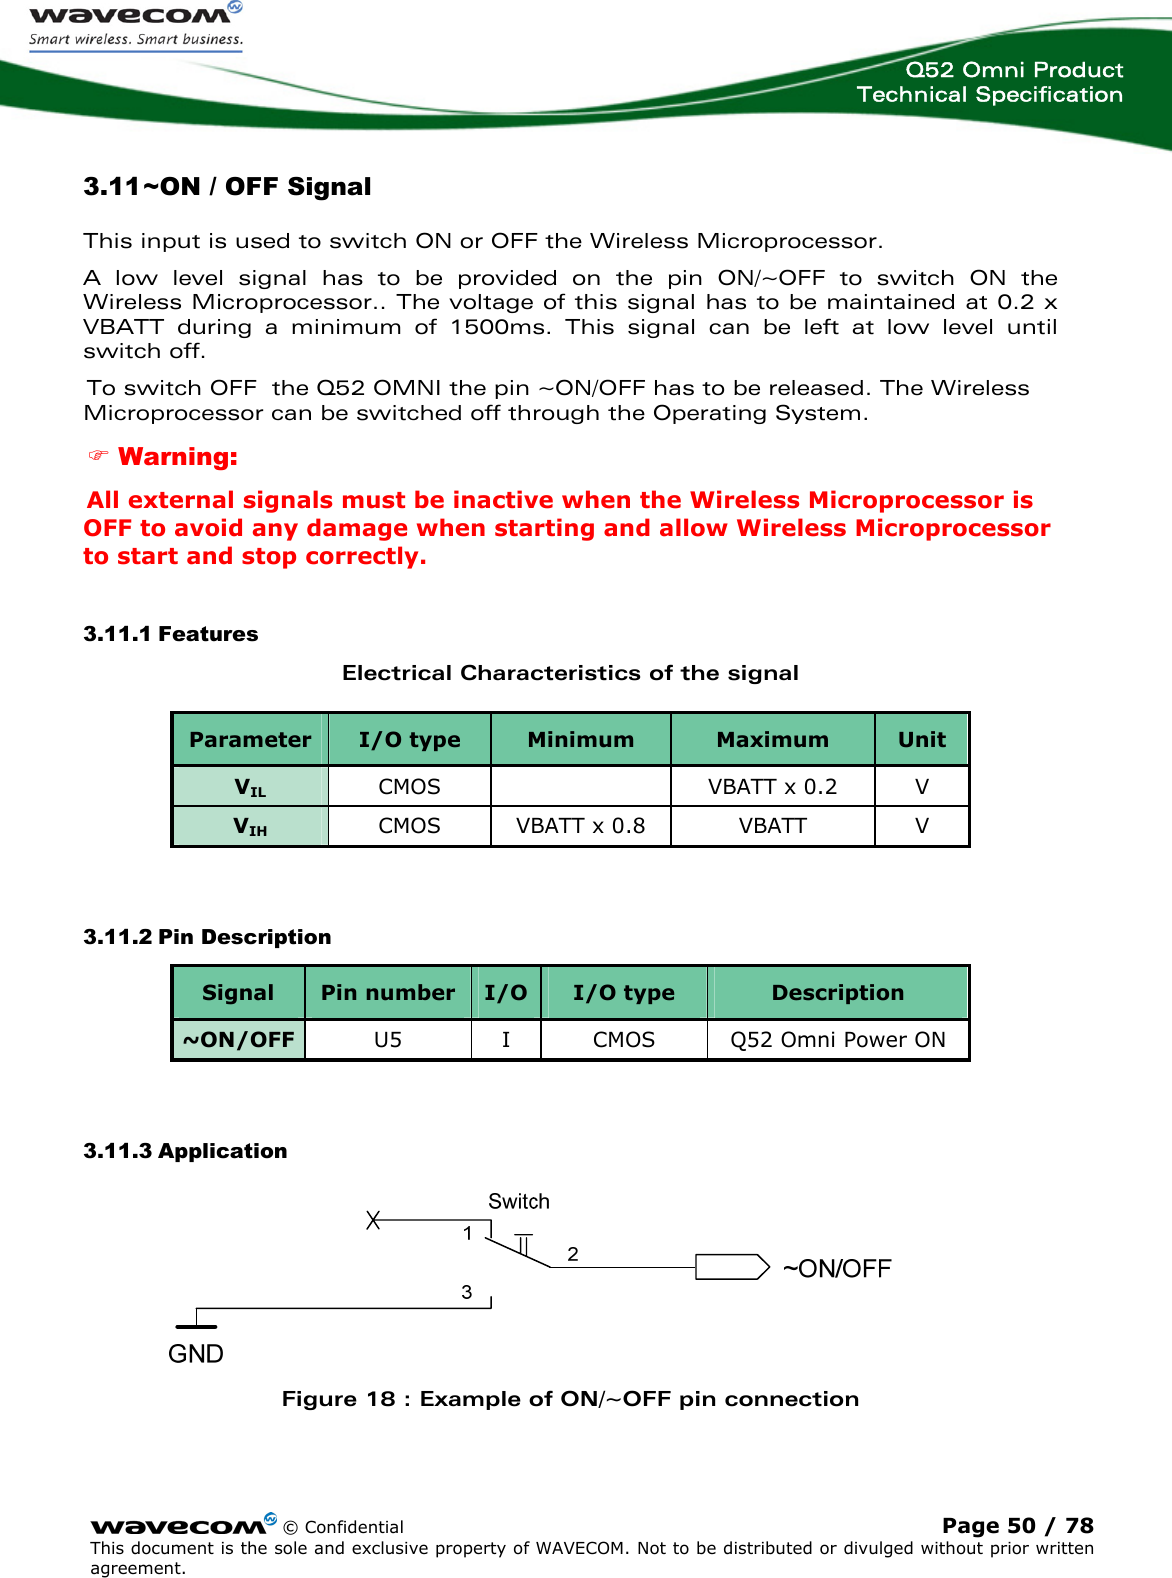  Q52 Omni Product Technical Specification   3.11 ~ON / OFF Signal This input is used to switch ON or OFF the Wireless Microprocessor.  A low level signal has to be provided on the pin ON/~OFF to switch ON the Wireless Microprocessor.. The voltage of this signal has to be maintained at 0.2 x VBATT during a minimum of 1500ms. This signal can be left at low level until switch off. To switch OFF  the Q52 OMNI the pin ~ON/OFF has to be released. The Wireless Microprocessor can be switched off through the Operating System. ) Warning: All external signals must be inactive when the Wireless Microprocessor is OFF to avoid any damage when starting and allow Wireless Microprocessor to start and stop correctly. 3.11.1 Features Electrical Characteristics of the signal Parameter  I/O type  Minimum  Maximum  Unit VIL CMOS    VBATT x 0.2  V VIH CMOS  VBATT x 0.8  VBATT  V  3.11.2 Pin Description Signal  Pin number  I/O type  Description I/O ~ON/OFF  U5  I  CMOS  Q52 Omni Power ON  3.11.3 Application  Figure 18 : Example of ON/~OFF pin connection   © Confidential Page 50 / 78 This document is the sole and exclusive property of WAVECOM. Not to be distributed or divulged without prior written agreement.  